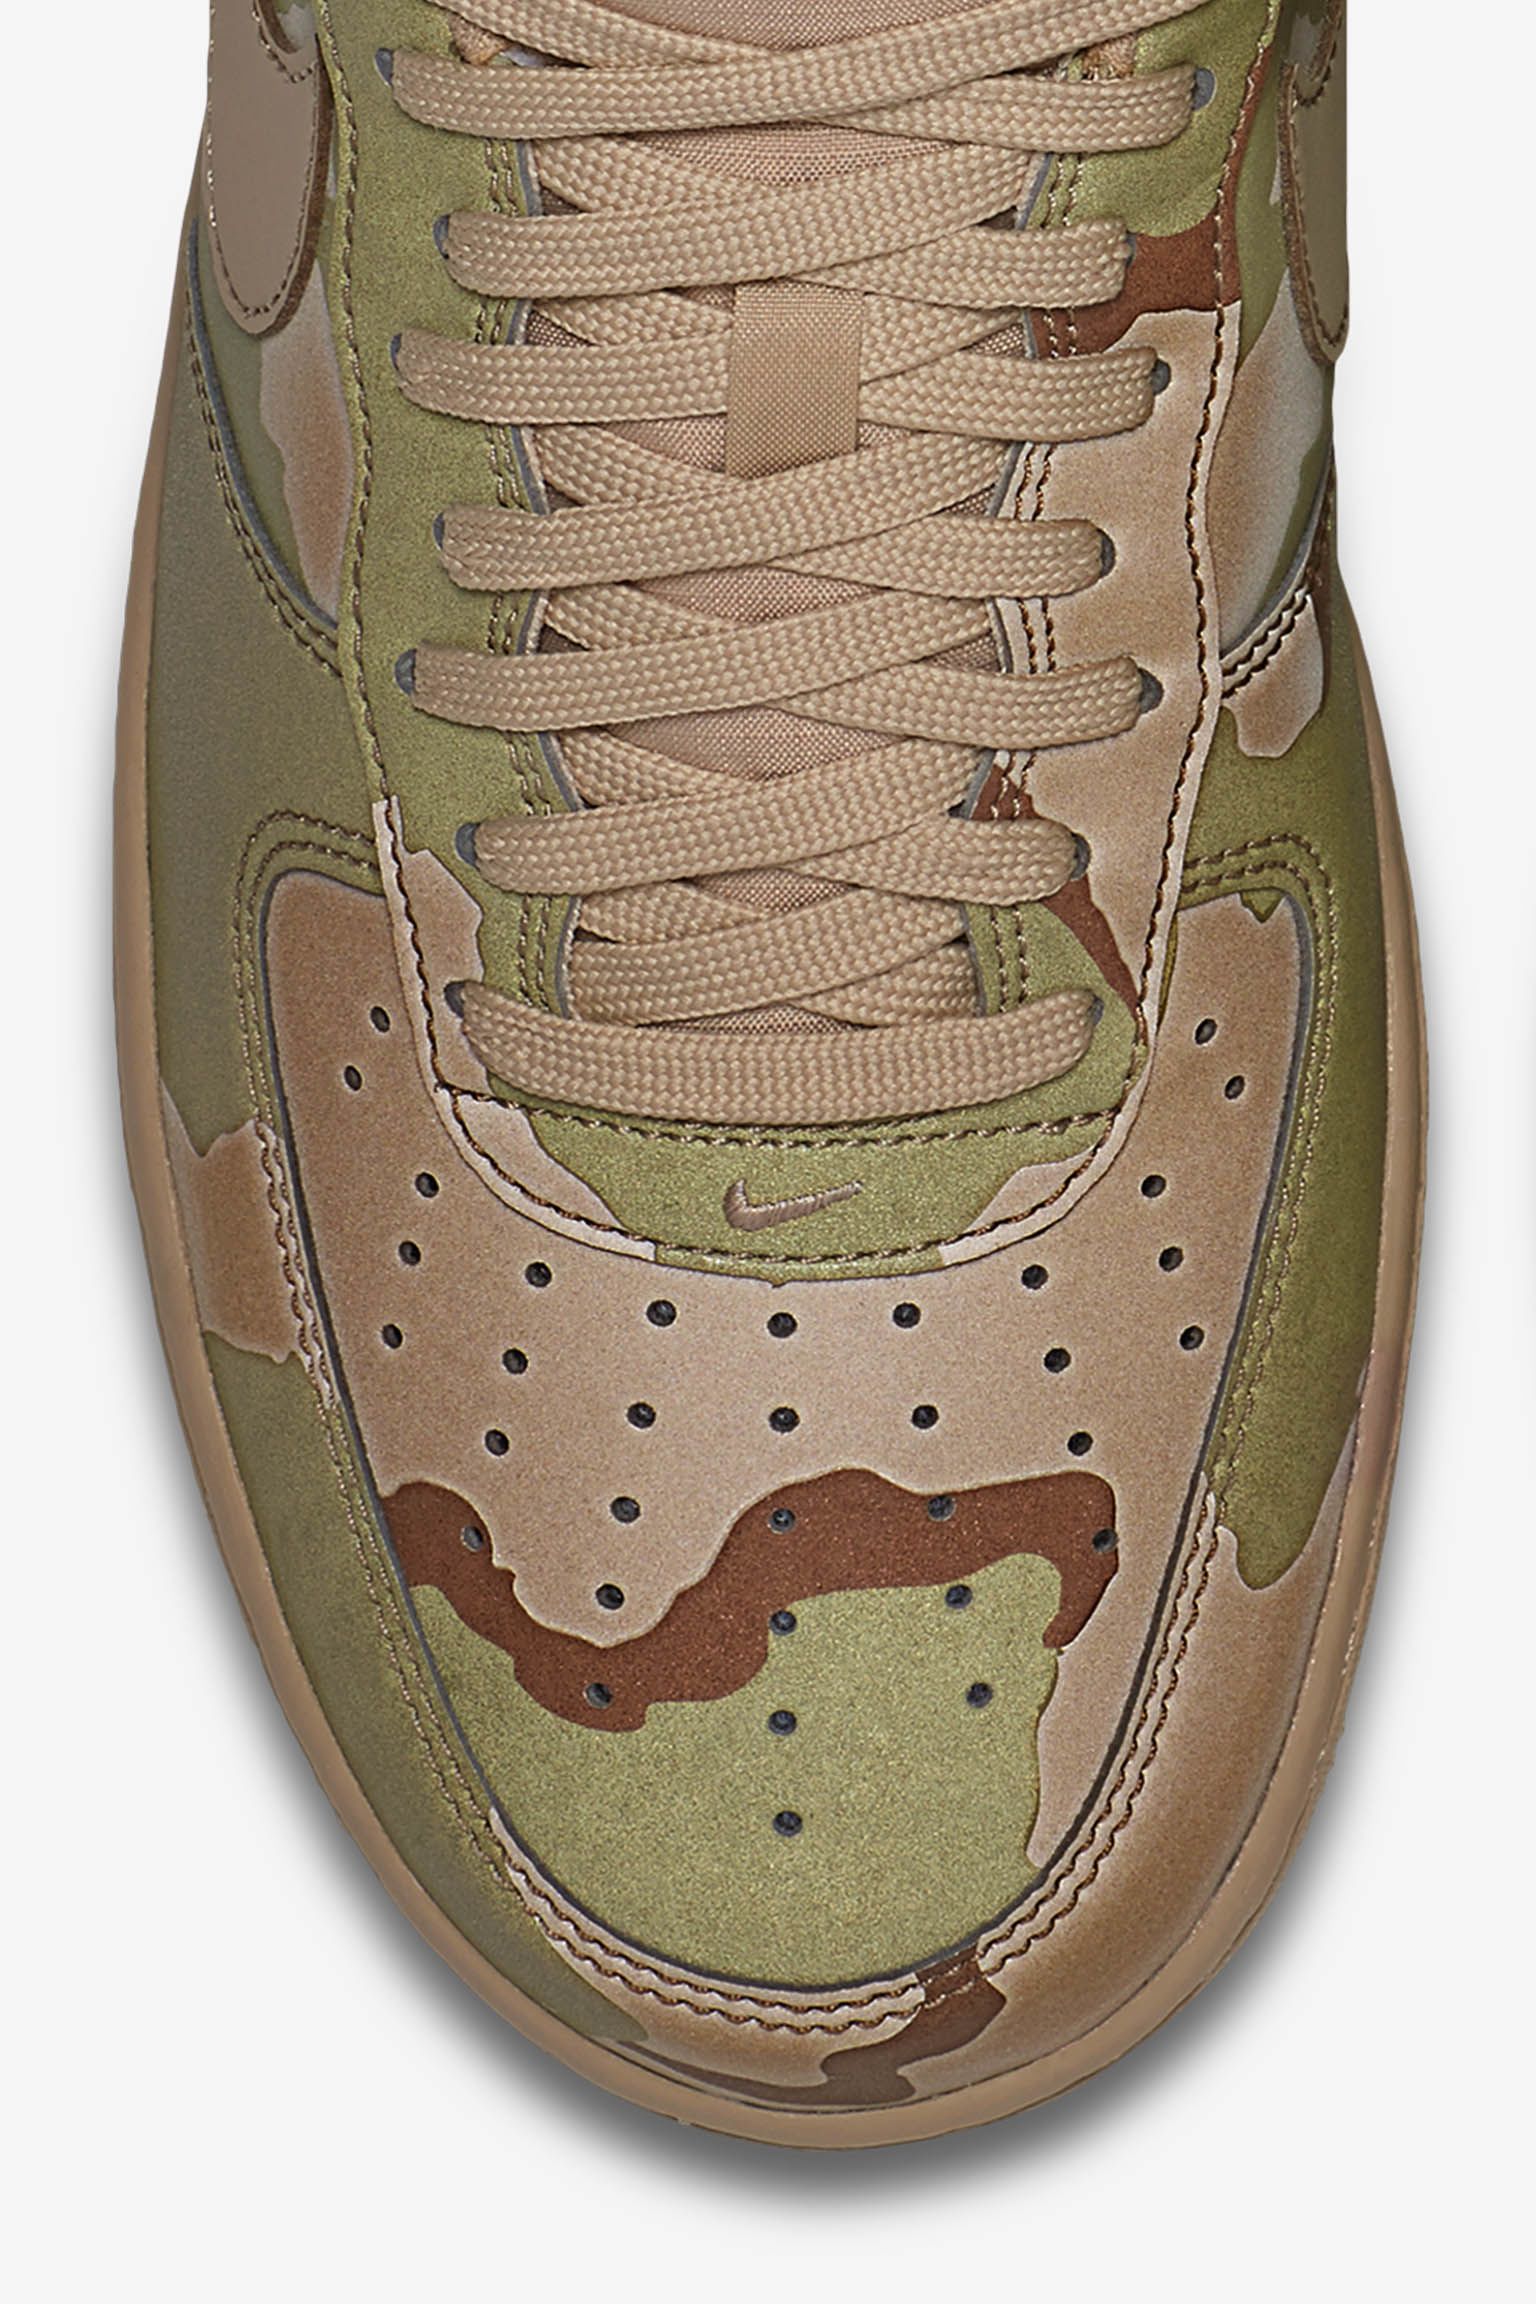 nike air force 1 camo shoes